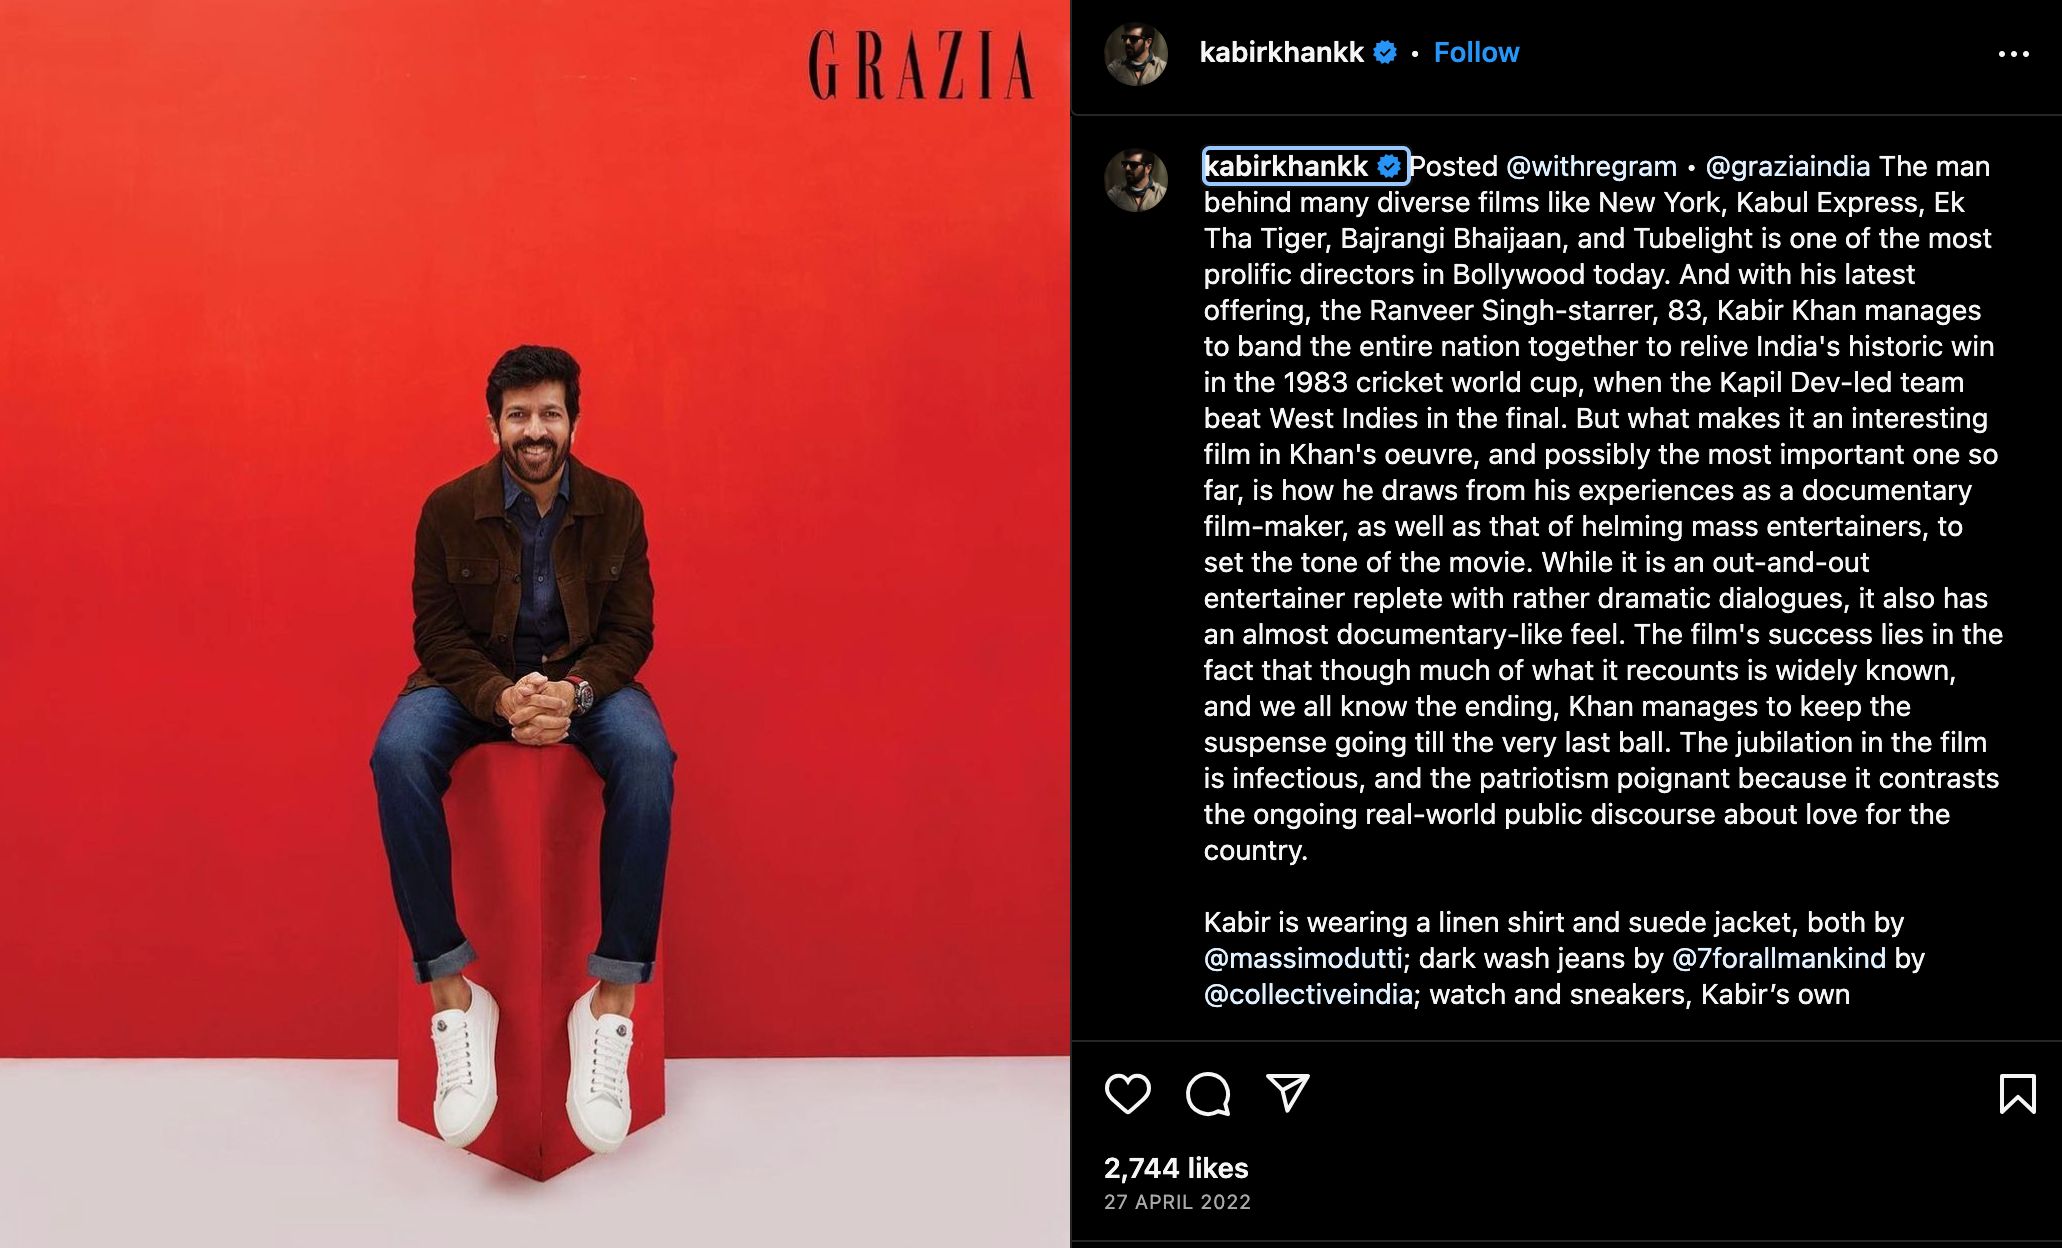 Kabir Khan's Instagram post in collaboration with Grazia India for the 'Grazia Cool List 2022'